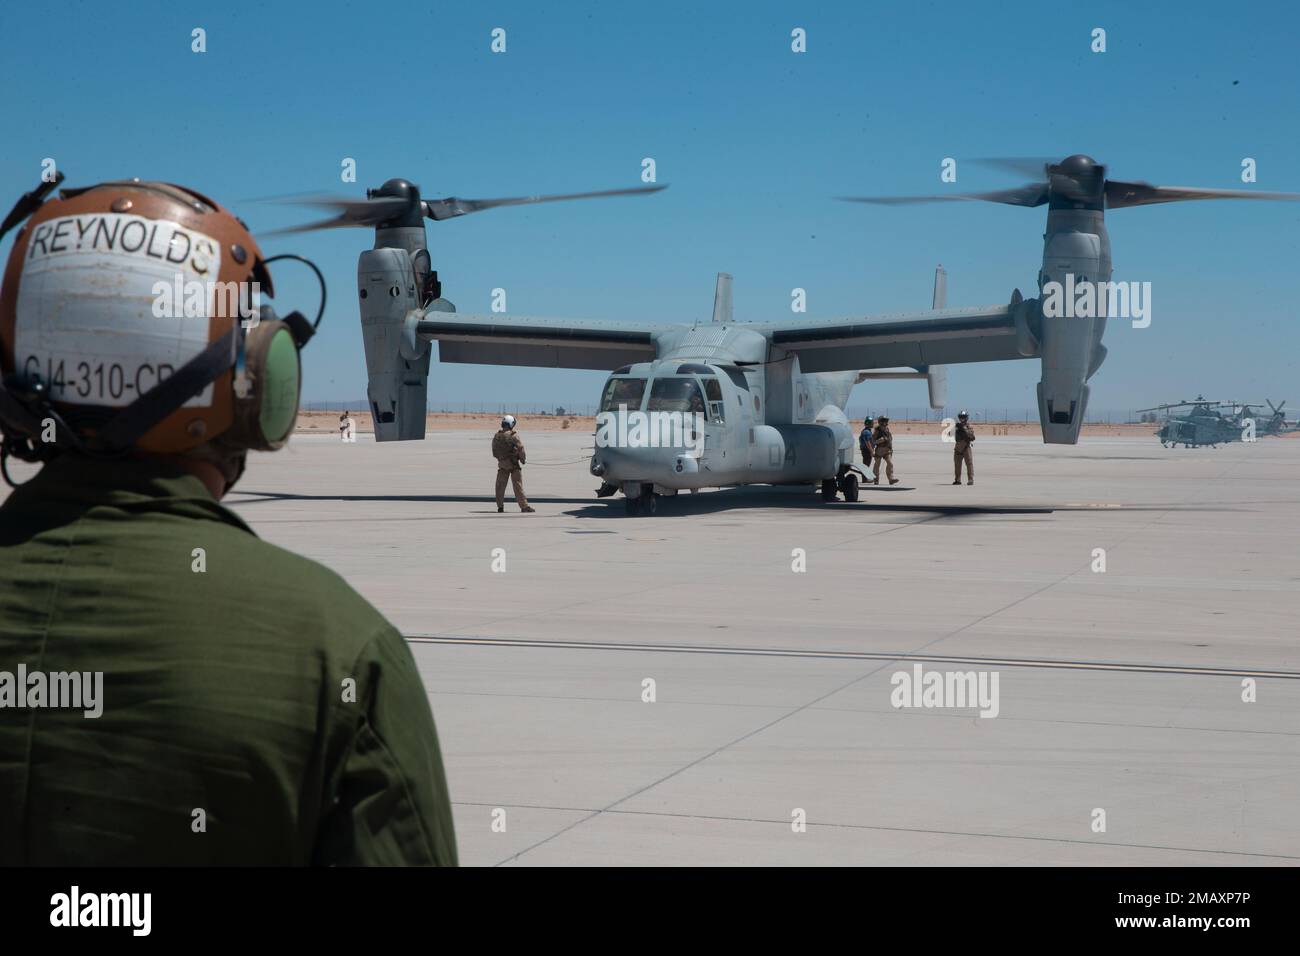 U.S. Marine Corps Lance Cpl. Brian Pallares, a tiltrotor mechanic with Marine Medium Tiltrotor Squadron (VMM) 362 (Reinforced), 13th Marine Expeditionary Unit, prepares to guide a MV-22B Osprey during Realistic Urban Training exercise at Marine Corps Air Station Yuma, Arizona, June 7, 2022. The purpose of RUT is to enhance the integration and collective capability of the MEU's command air, ground and logistics elements and prepare the 13th MEU to meet the nation's crisis response needs during its upcoming overseas deployment. Stock Photo